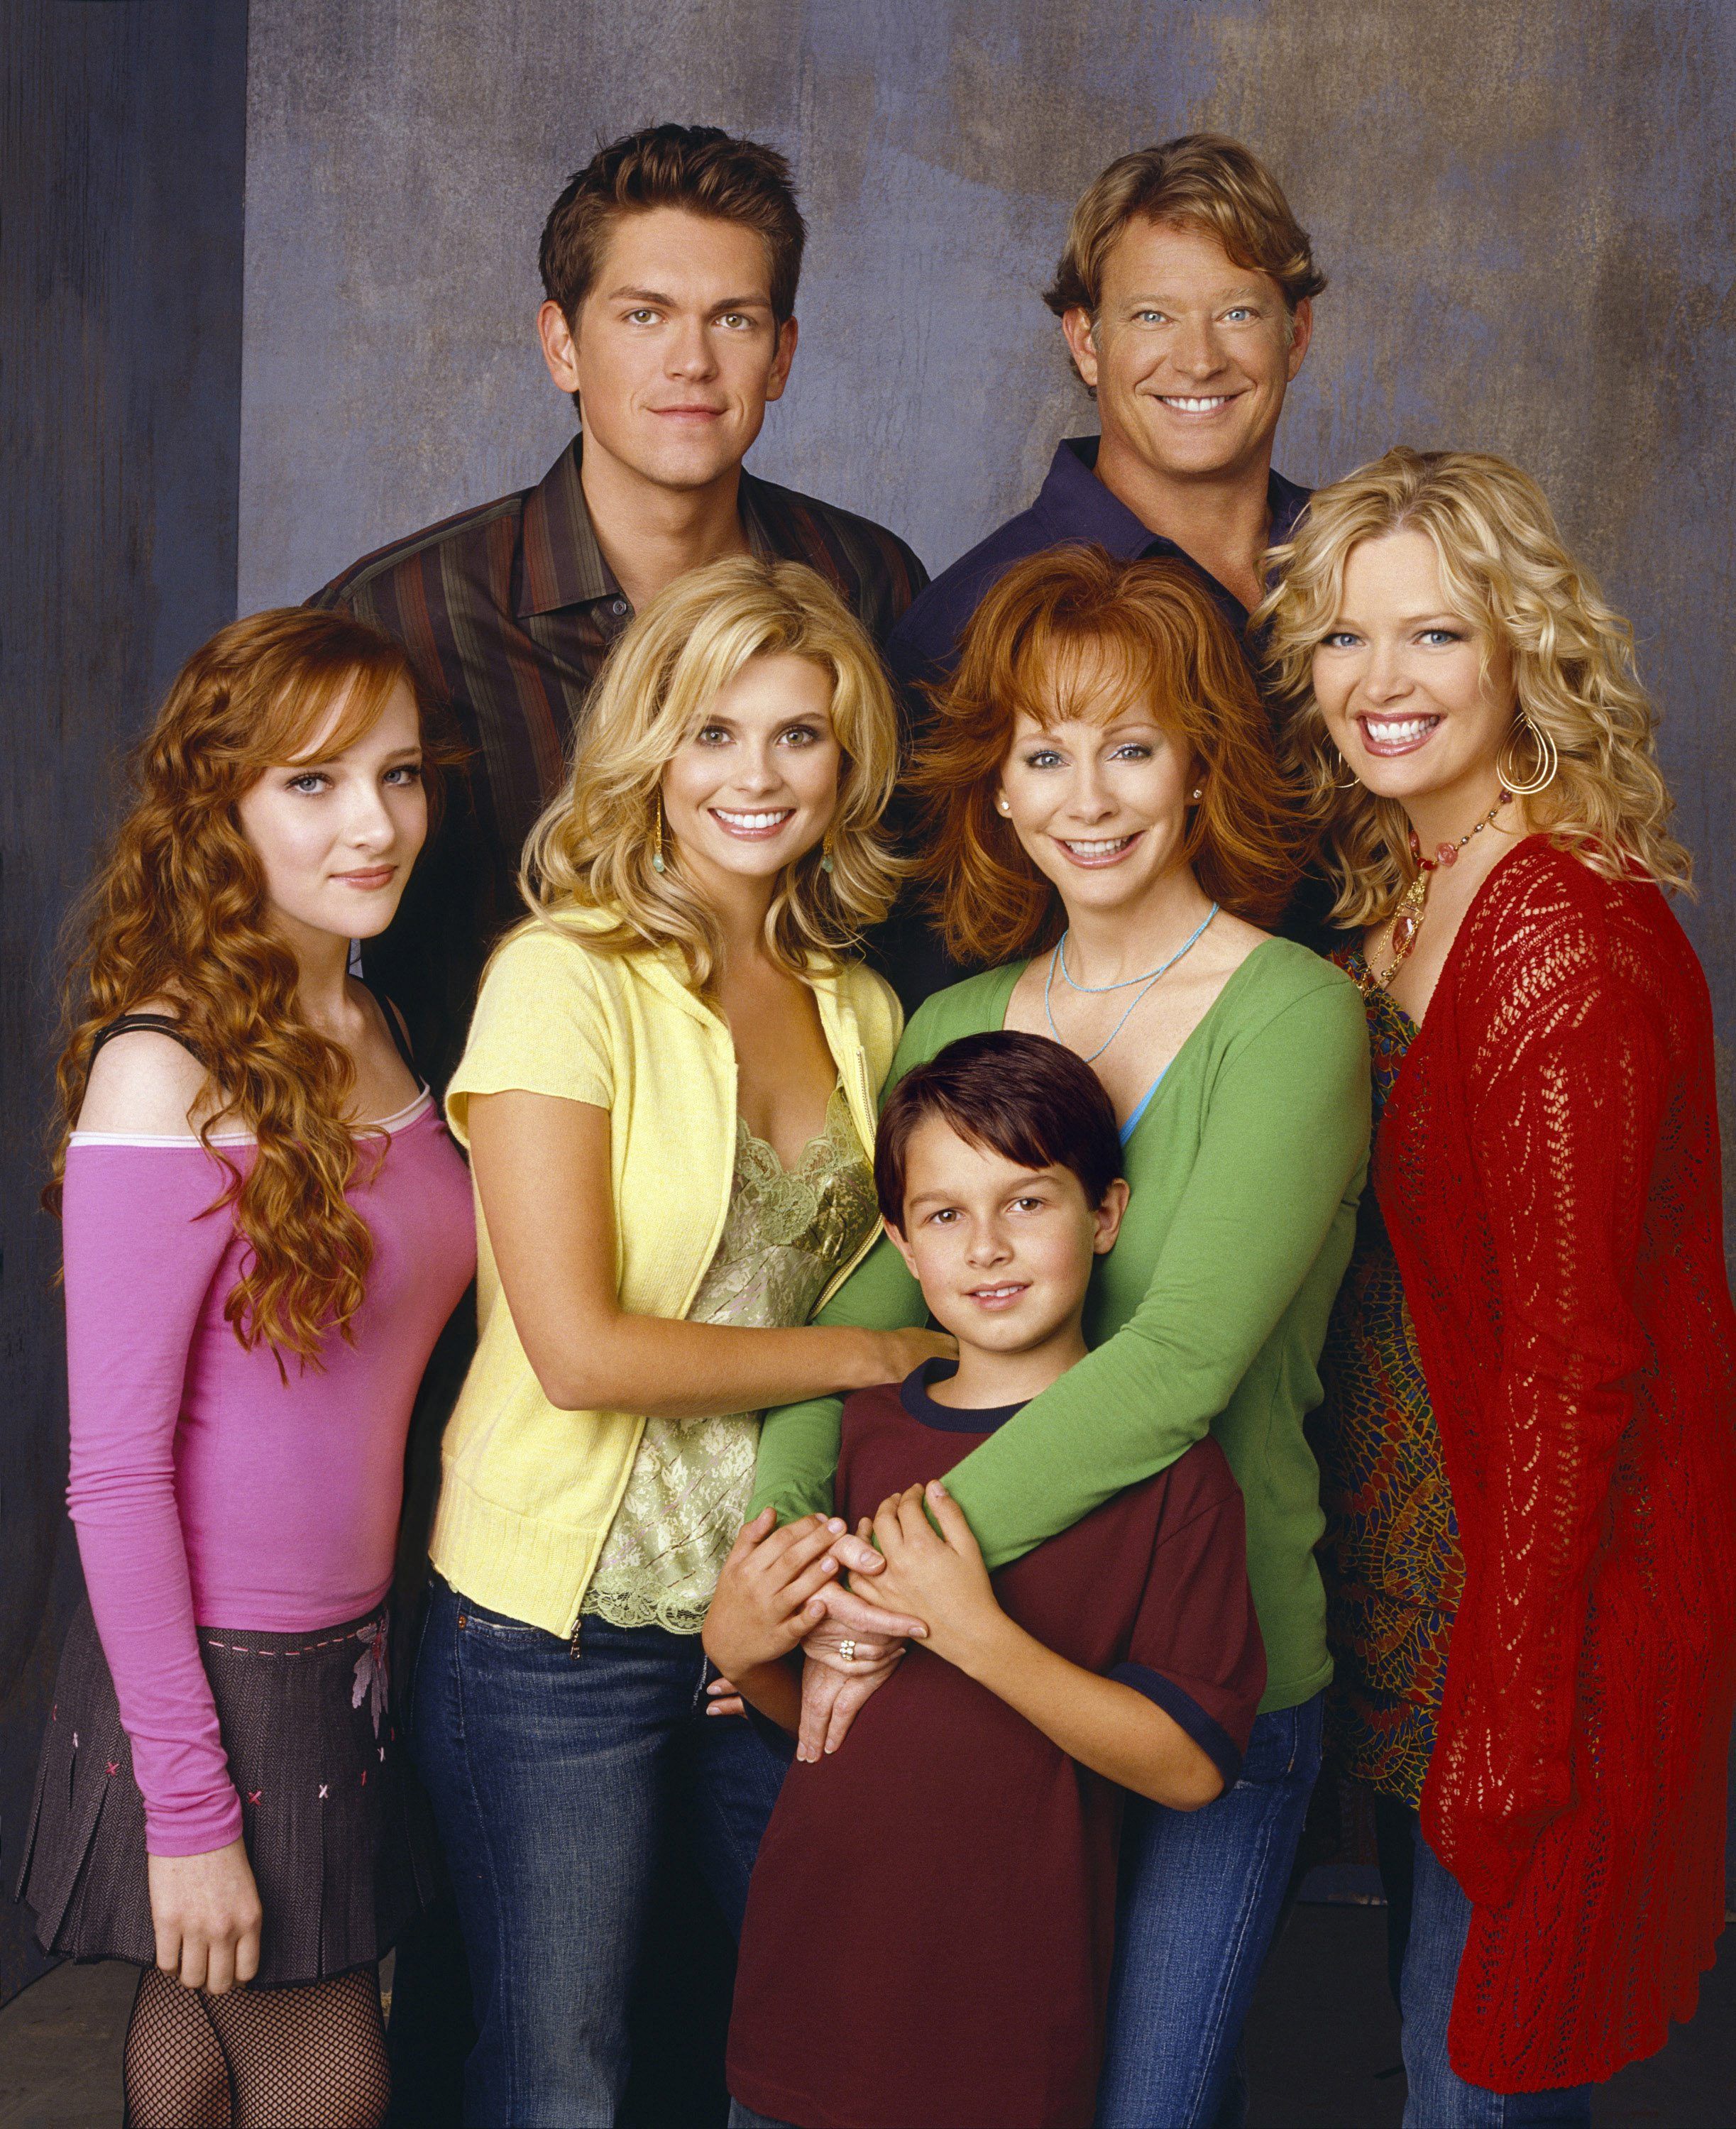 cast-of-reba-how-much-are-they-worth-now-fame10